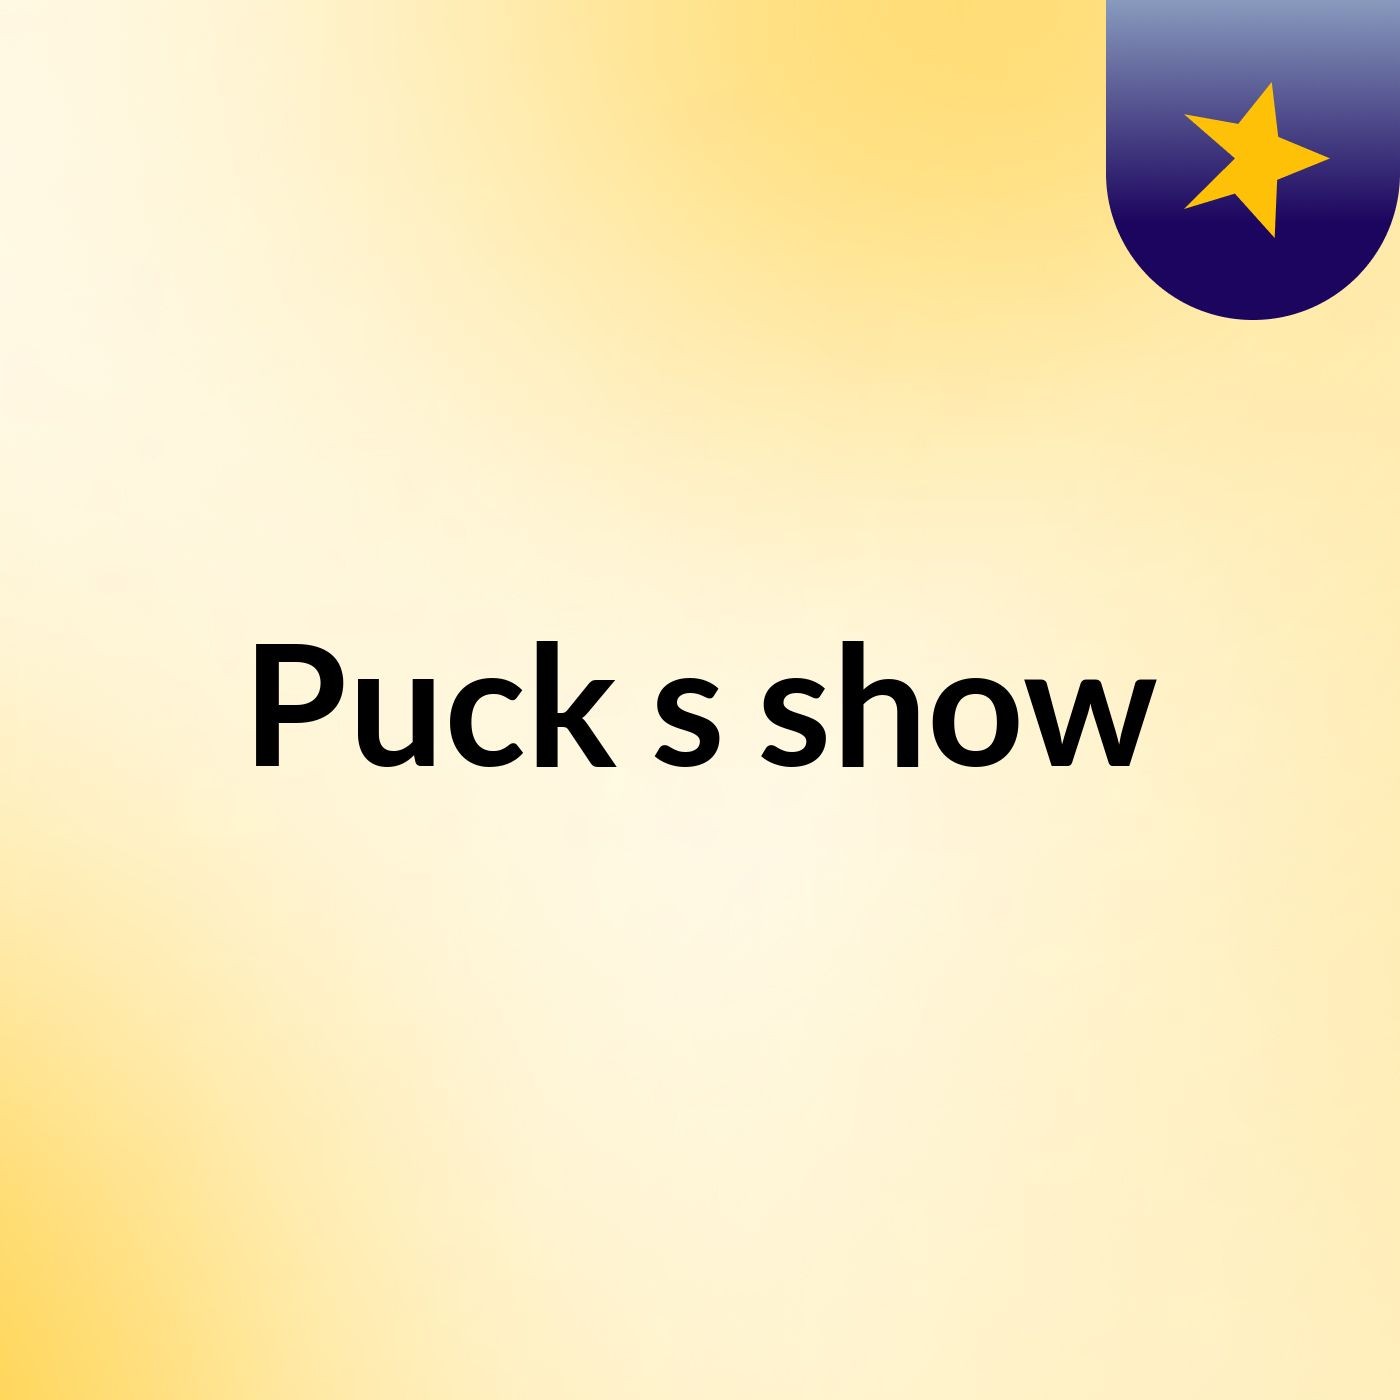 Puck's show